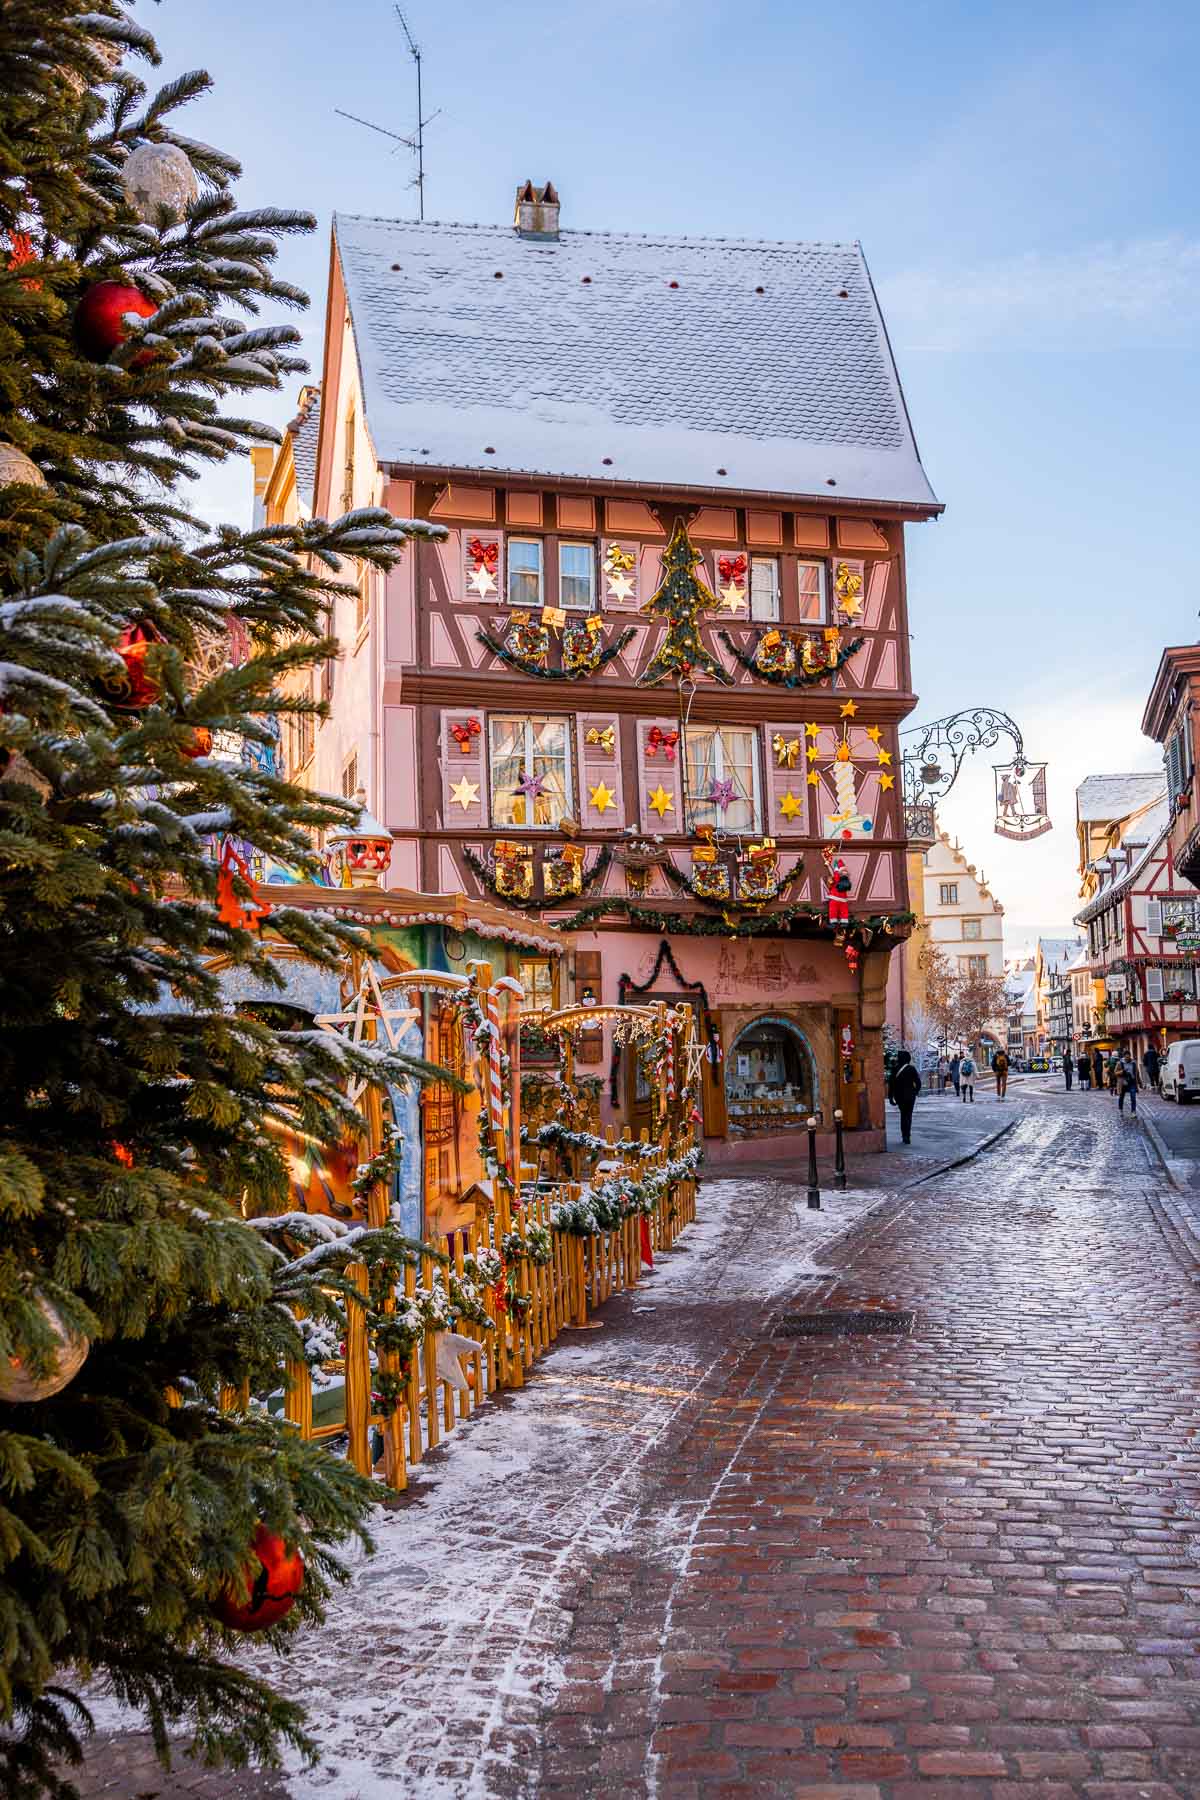 The cute house of Maison dite in Colmar, France